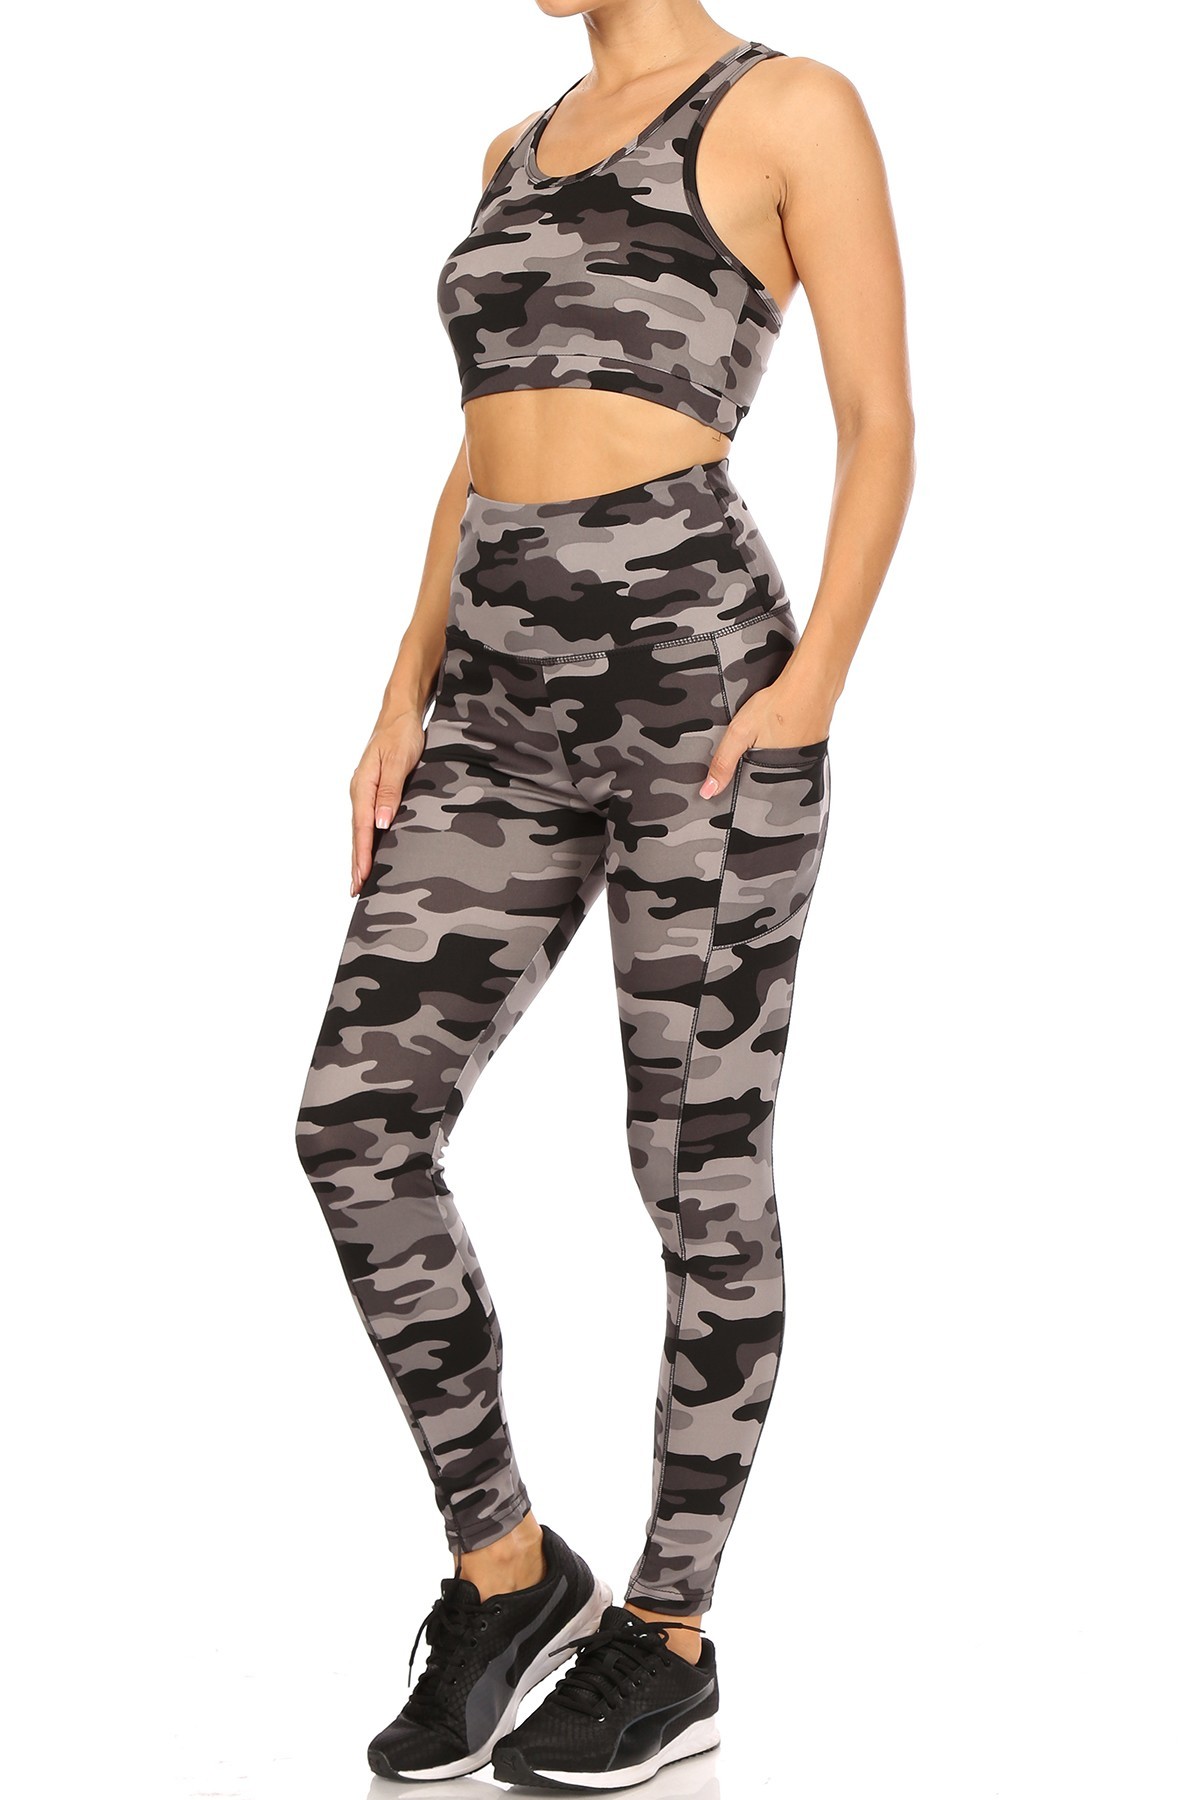 Wholesale 2 Piece Charcoal Camouflage Crop Top and Legging Set